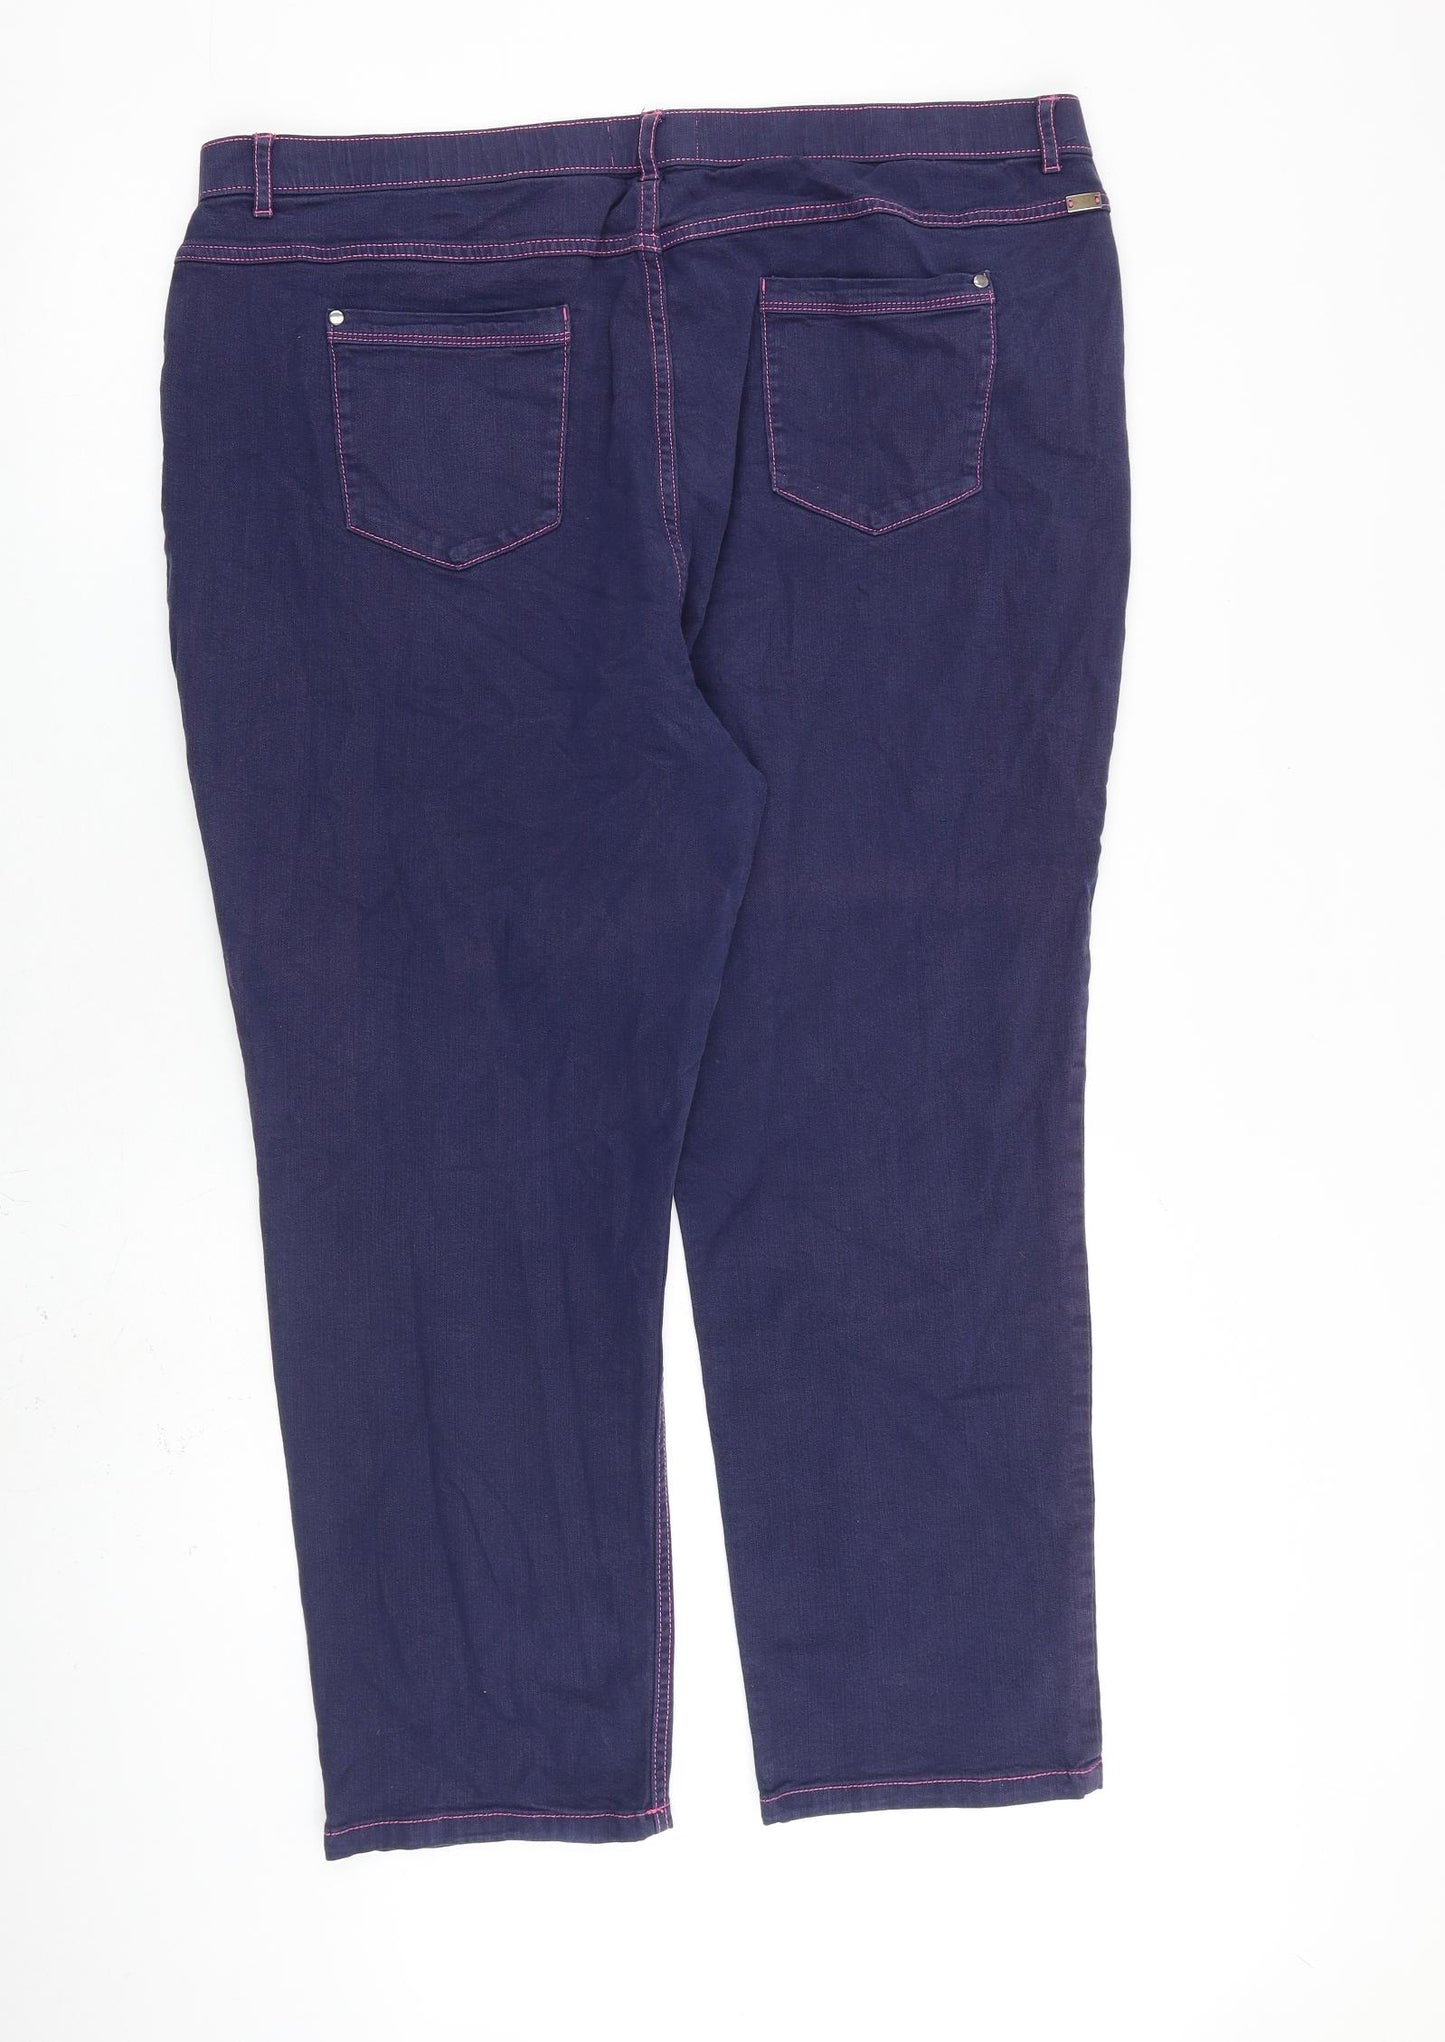 Classic Womens Blue Cotton Cropped Jeans Size 20 L26 in Regular Zip